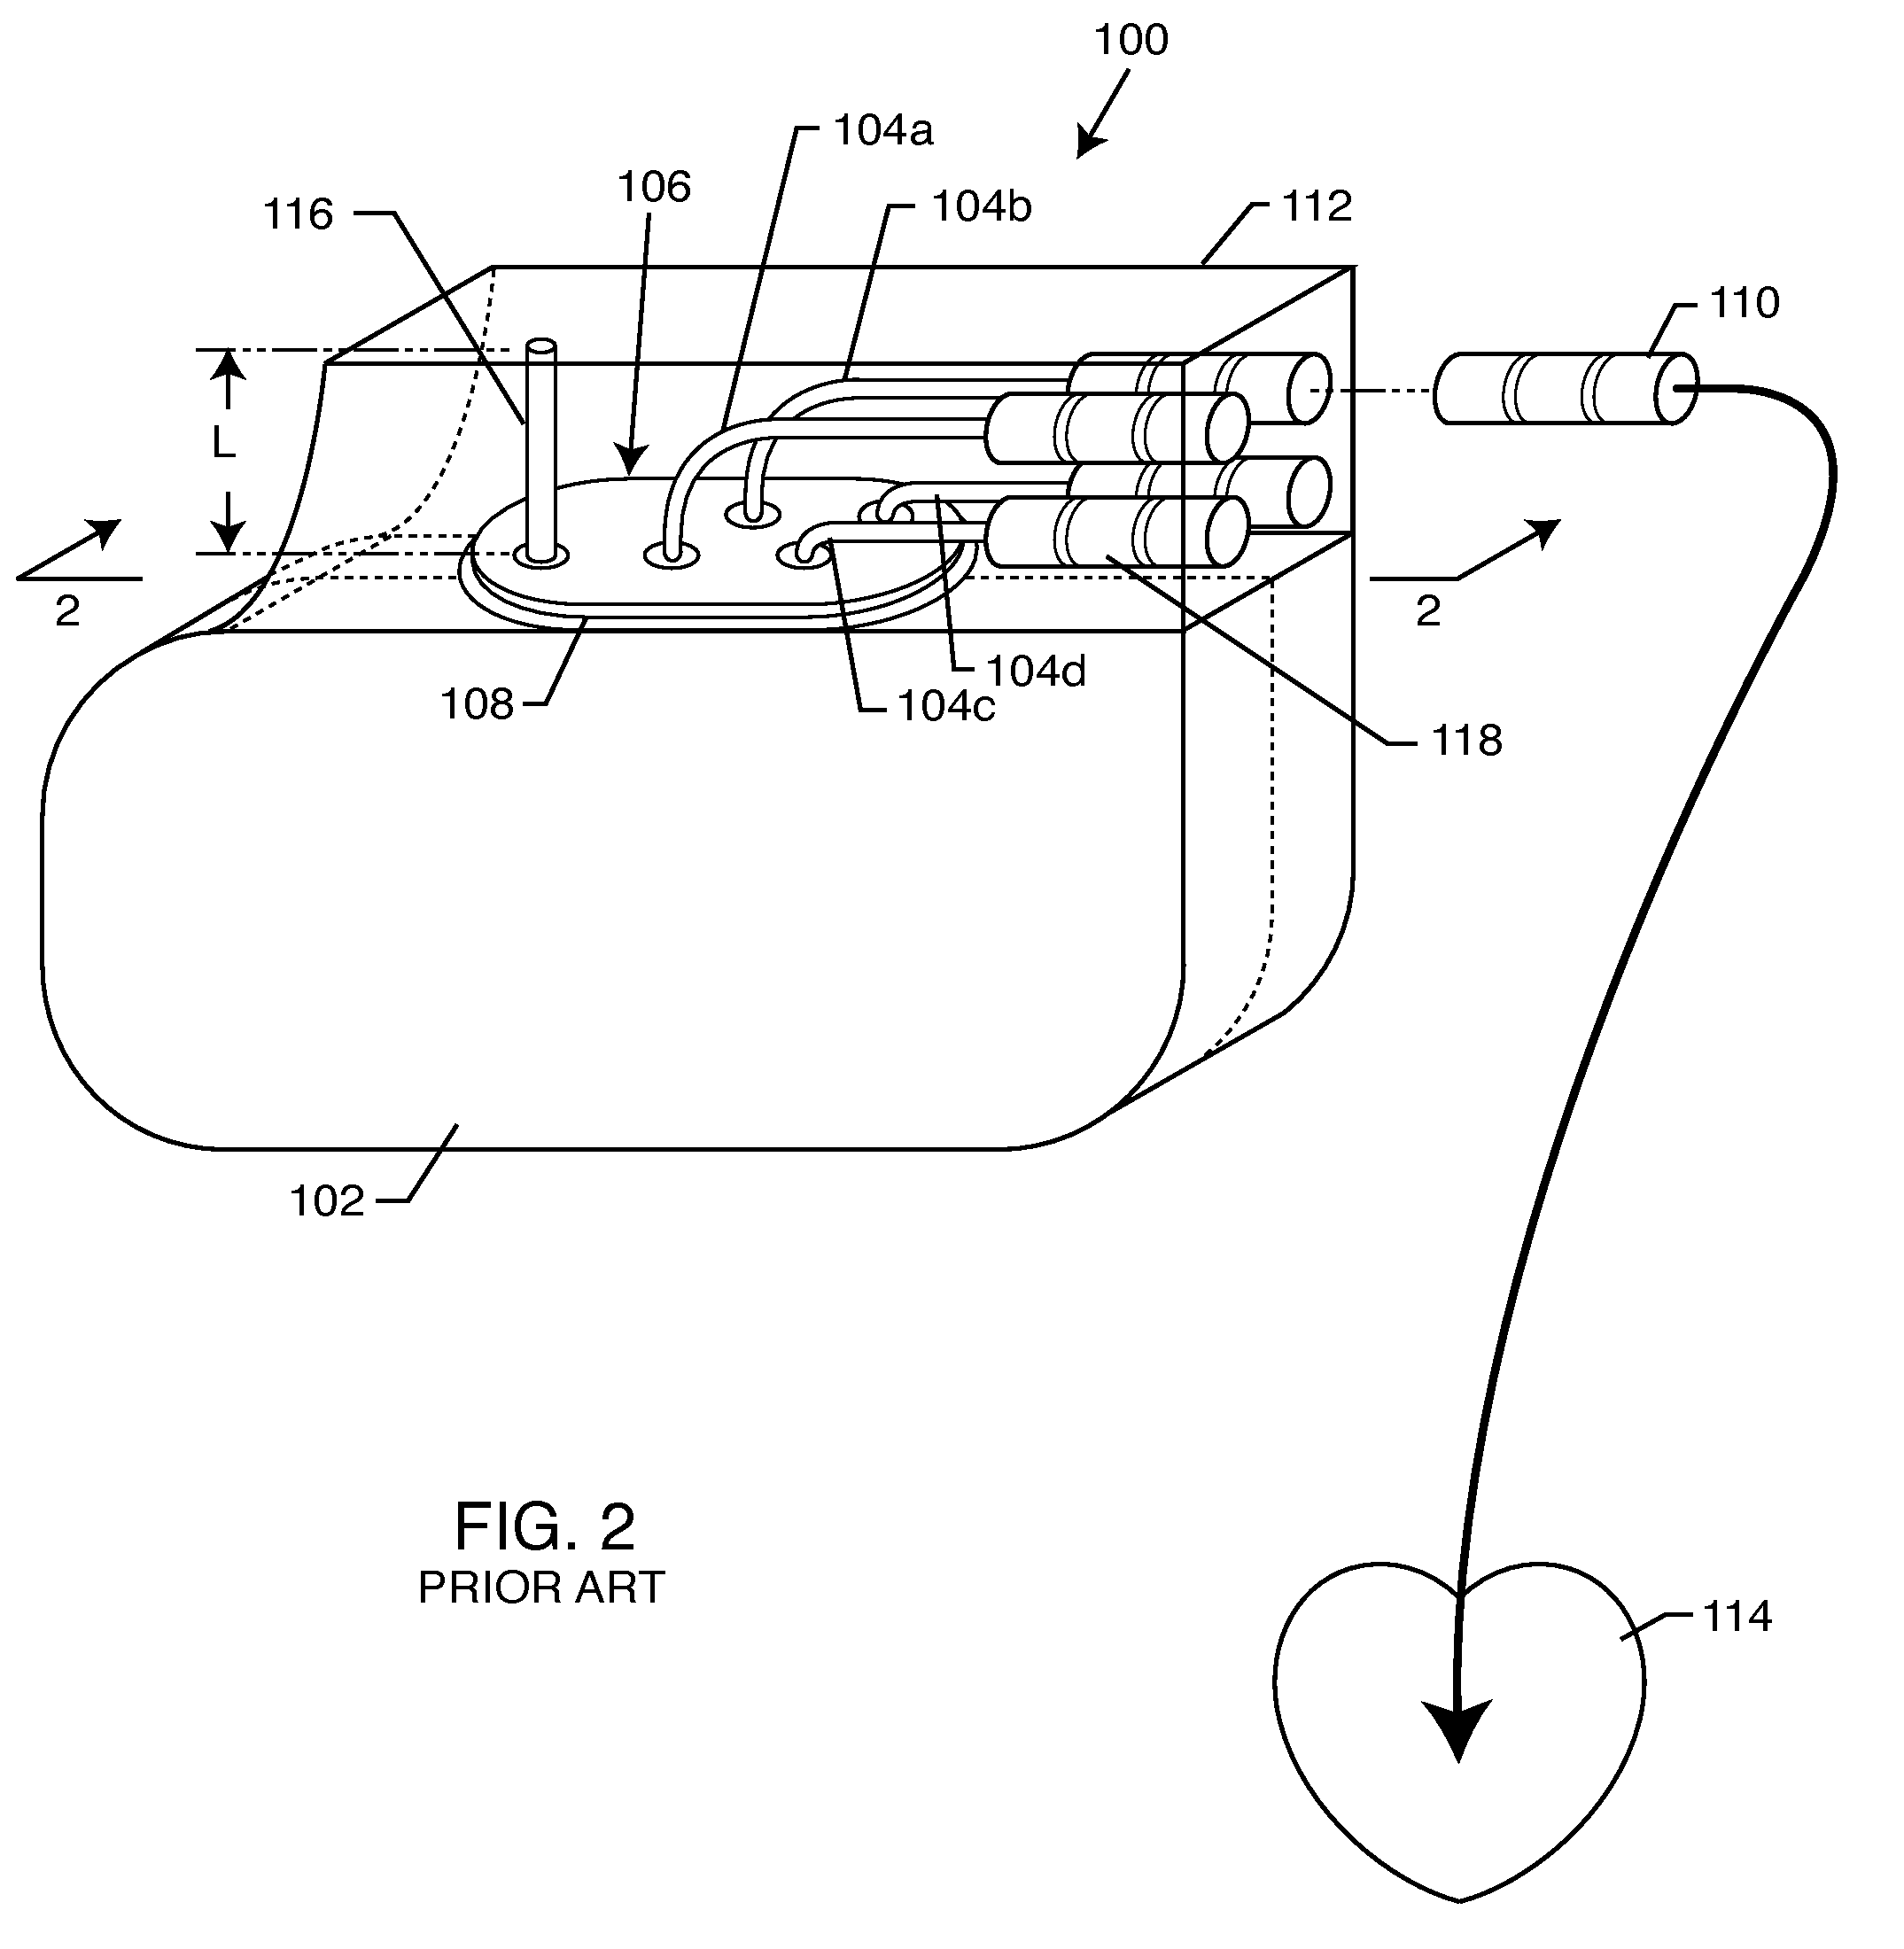 Switch for turning off therapy delivery of an active implantable medical device during MRI scans